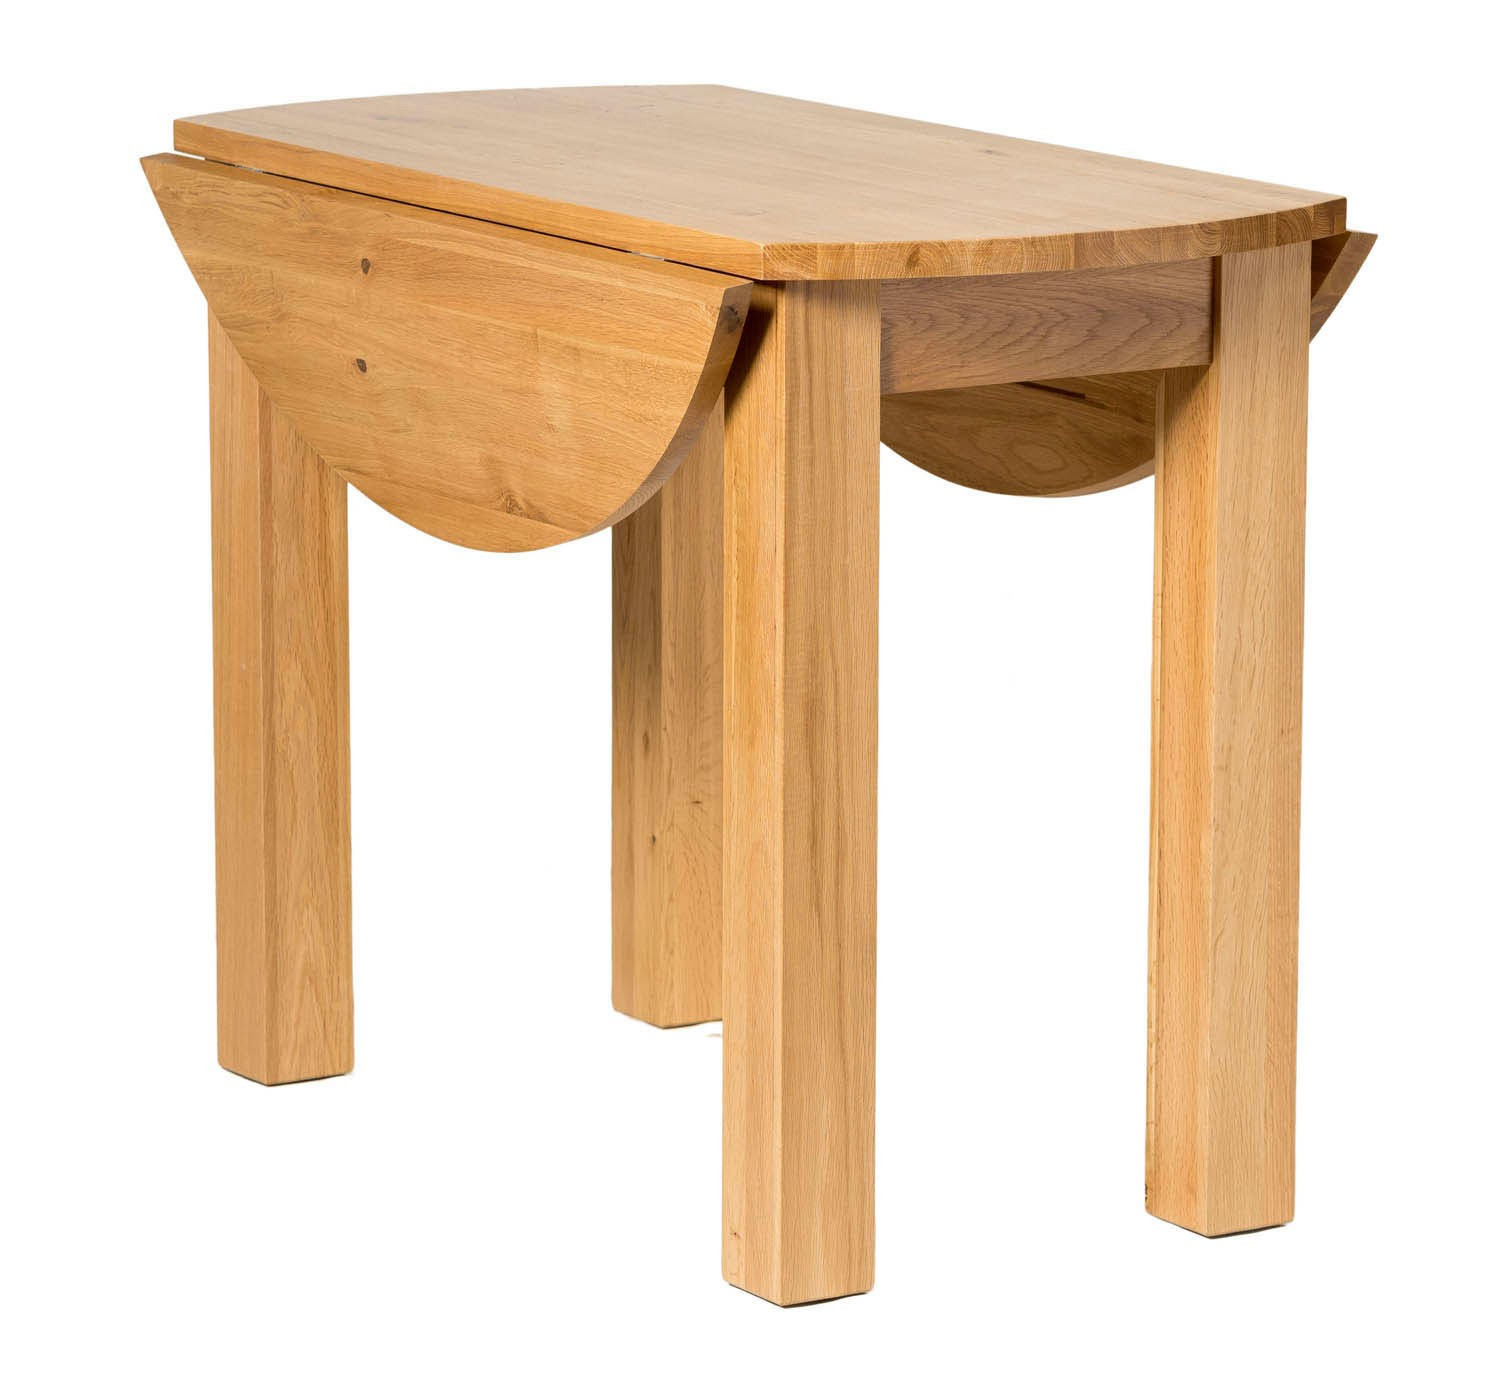 Small Folding Kitchen Table
 Waverly Solid Oak Drop Leaf Kitchen Dining Round Table